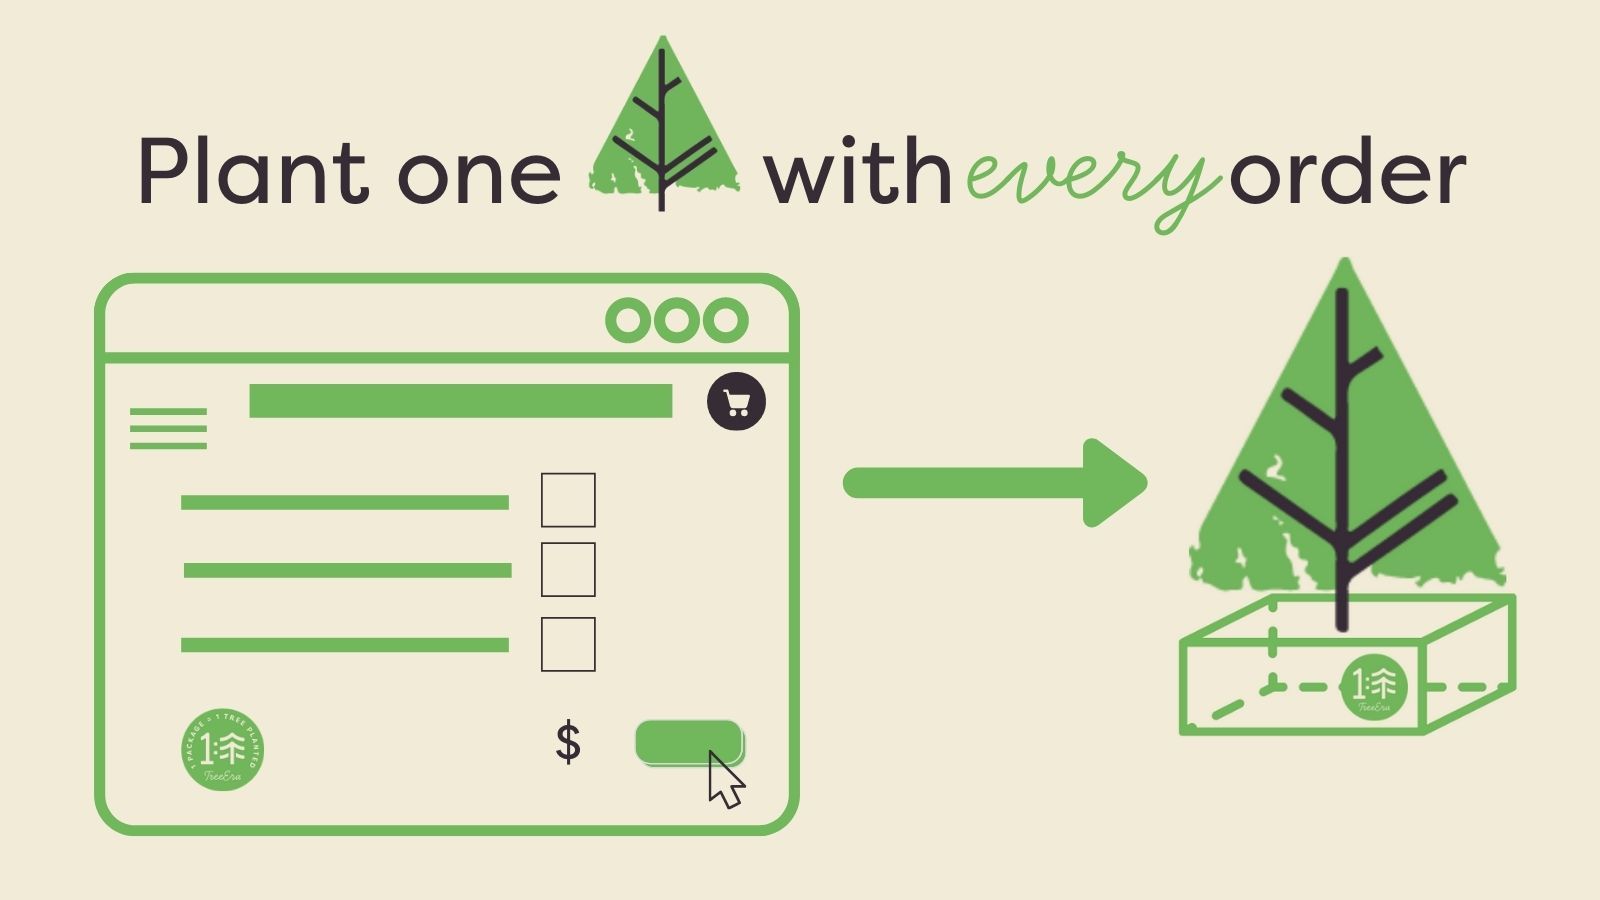 Plant 1 tree with every order.